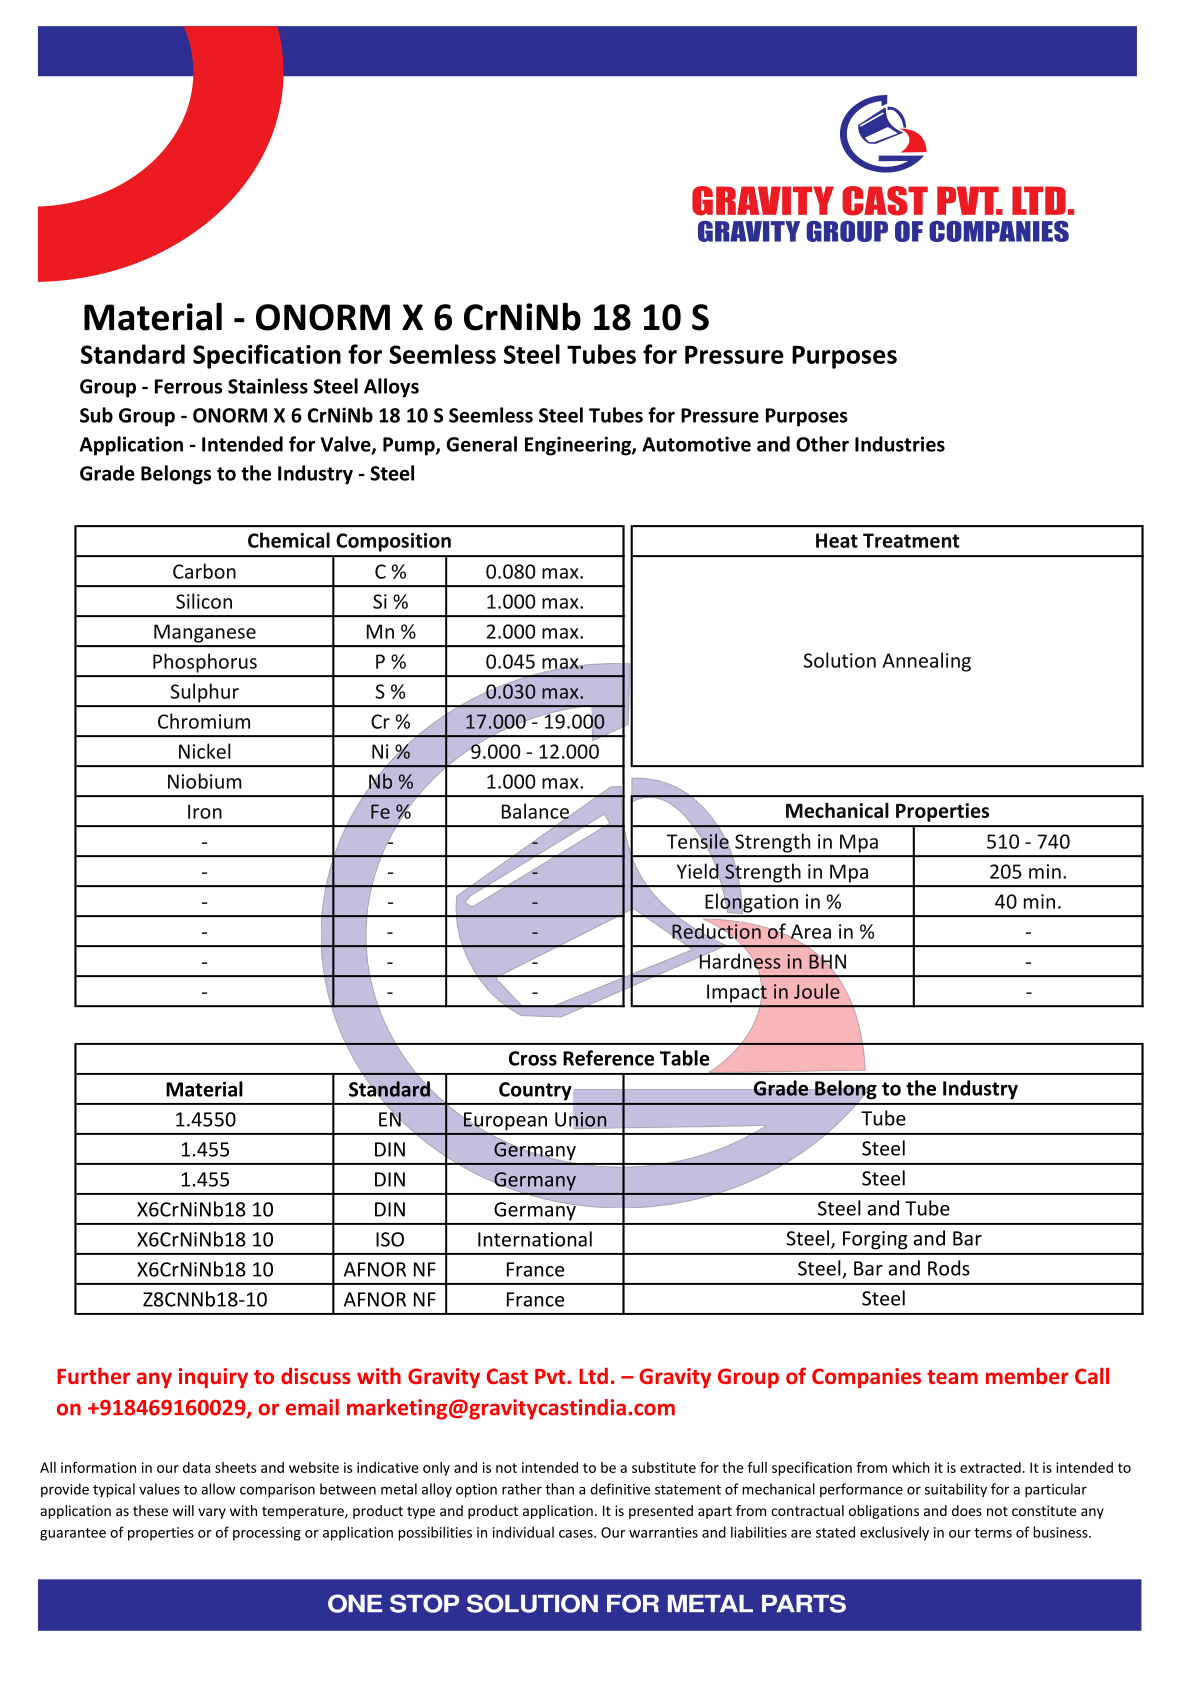 ONORM X 6 CrNiNb 18 10 S.pdf